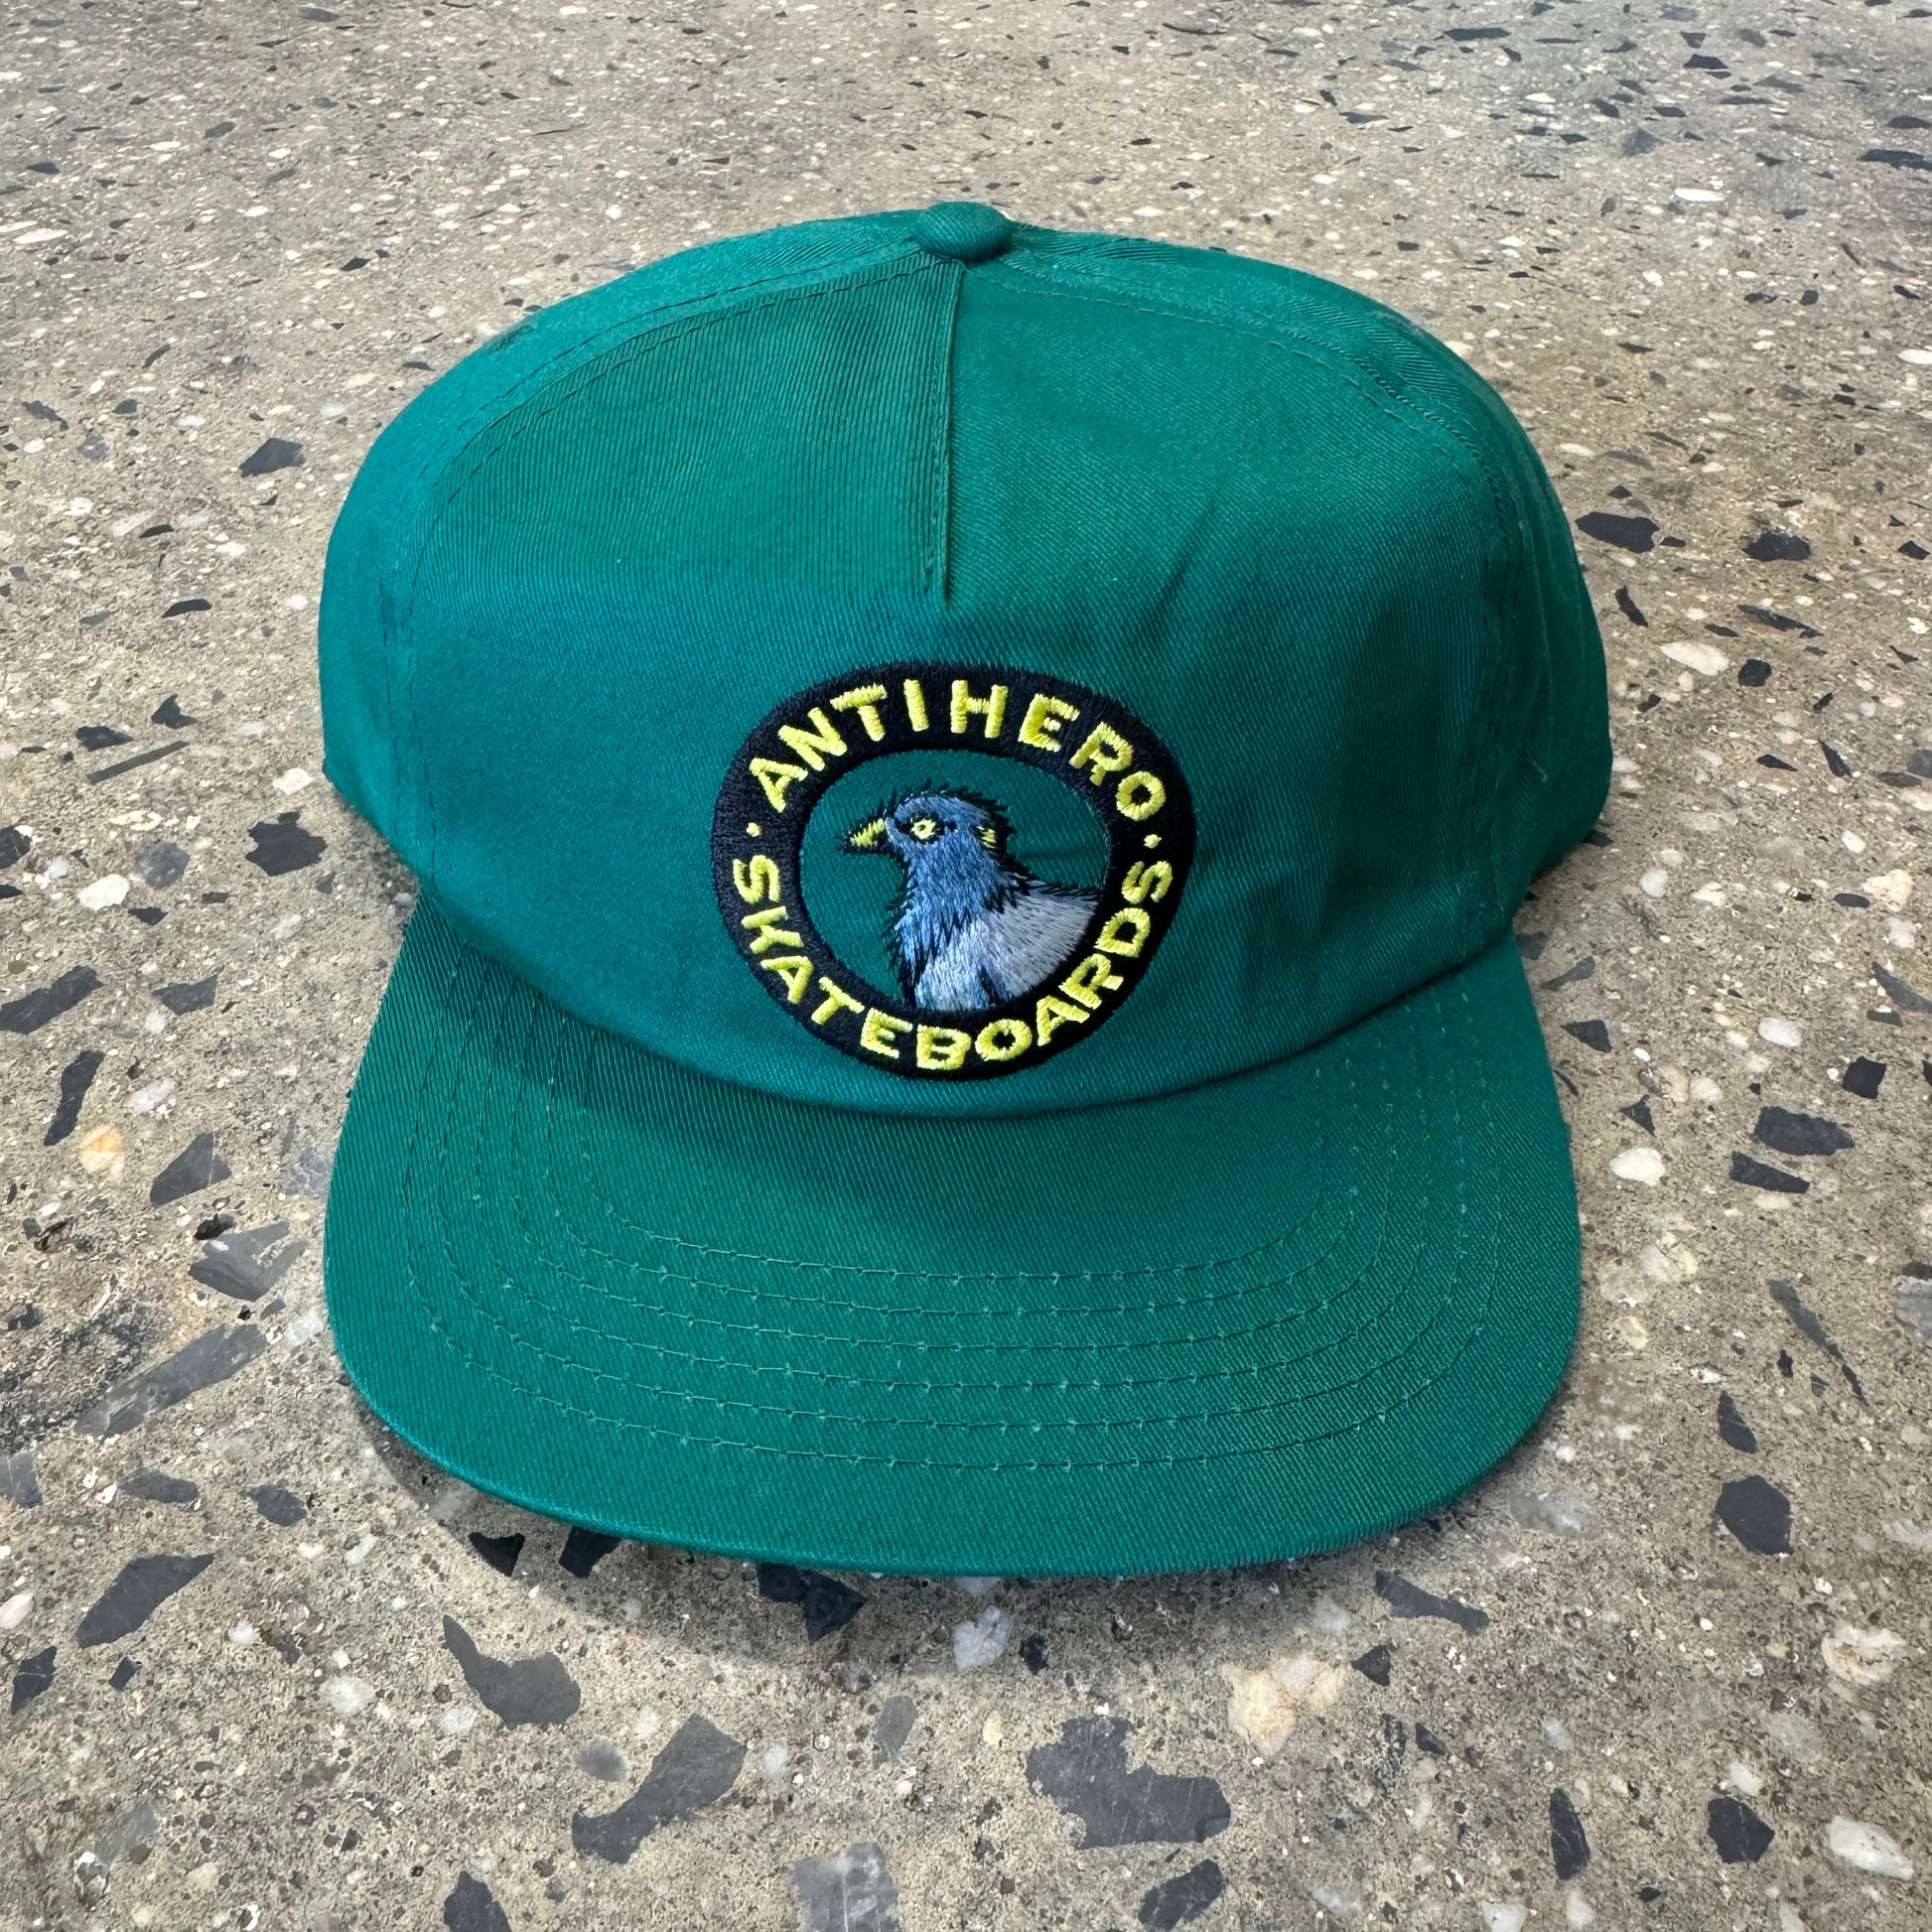 Green hat with yellow text and black circle embroidery with pigeon in the center of it